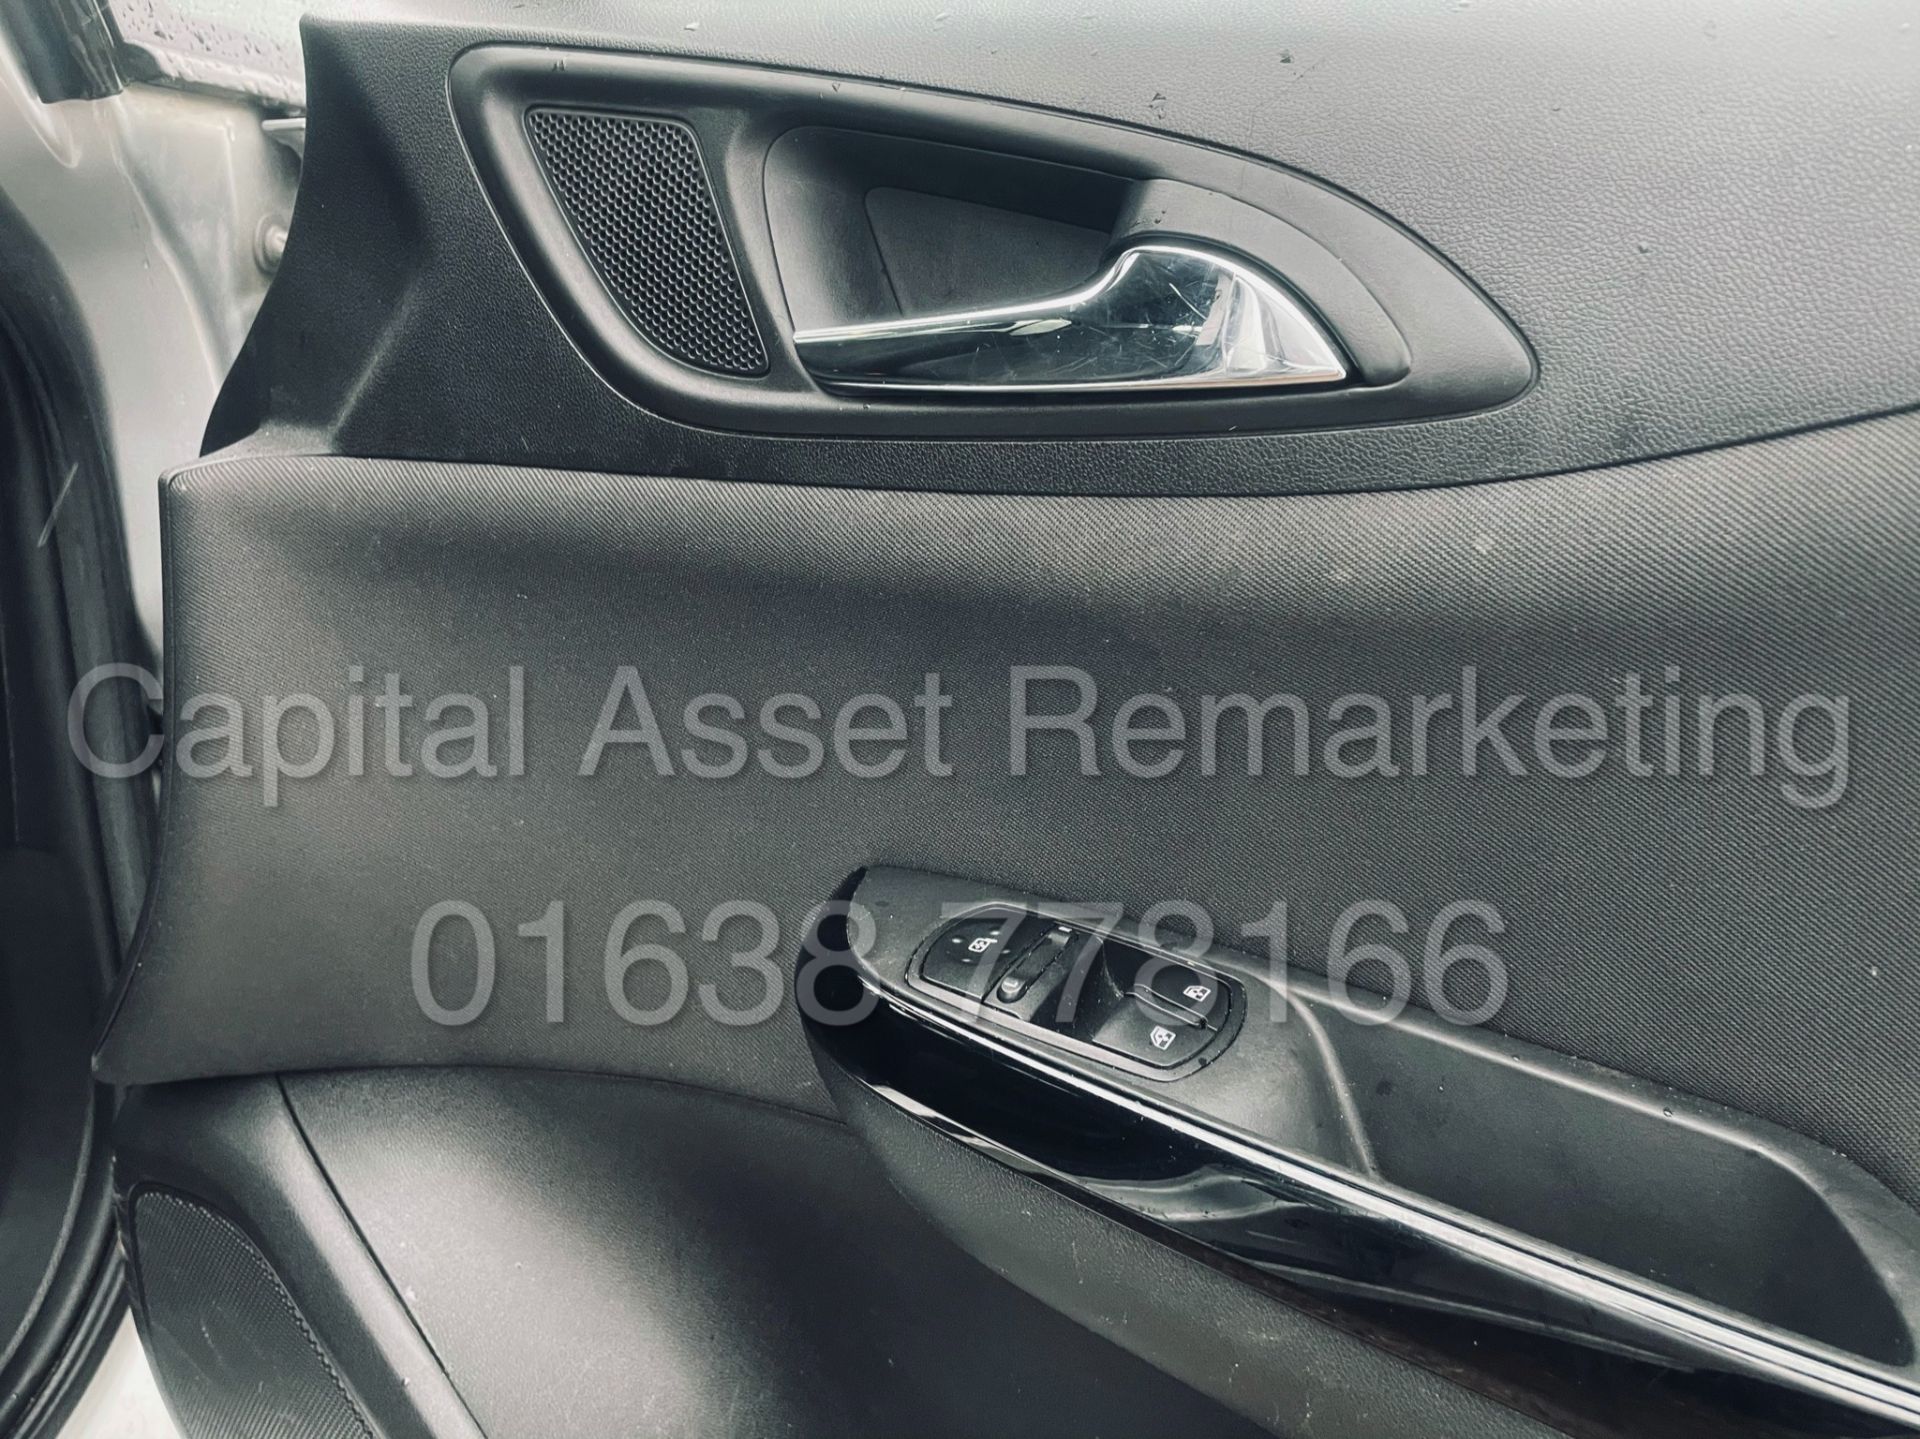 ON SALE VAUXHALL CORSA *LIMITED EDITION* 5 DOOR (2017 MODEL) '1.4 PETROL - ECOFLEX' *AIR CON* - Image 29 of 44